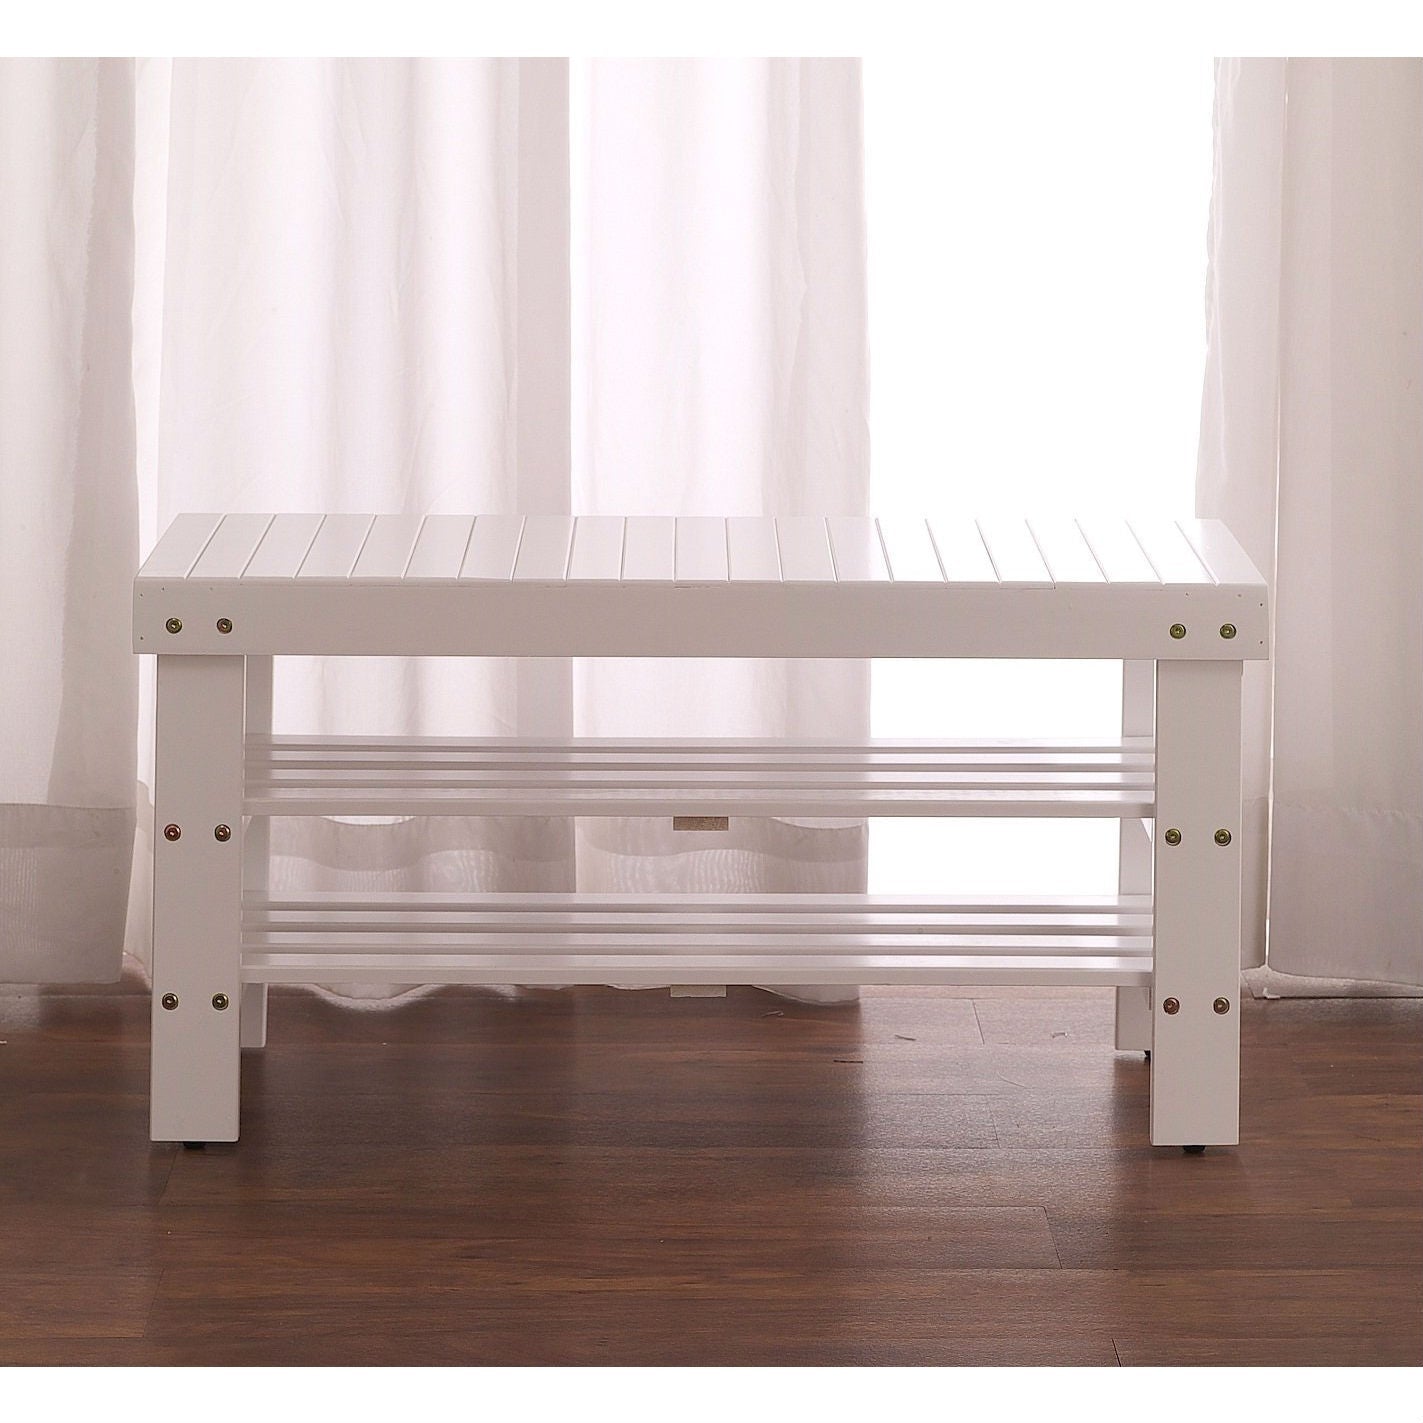 Accents > Benches - Solid Wood Shoe Rack Entryway Storage Bench In White